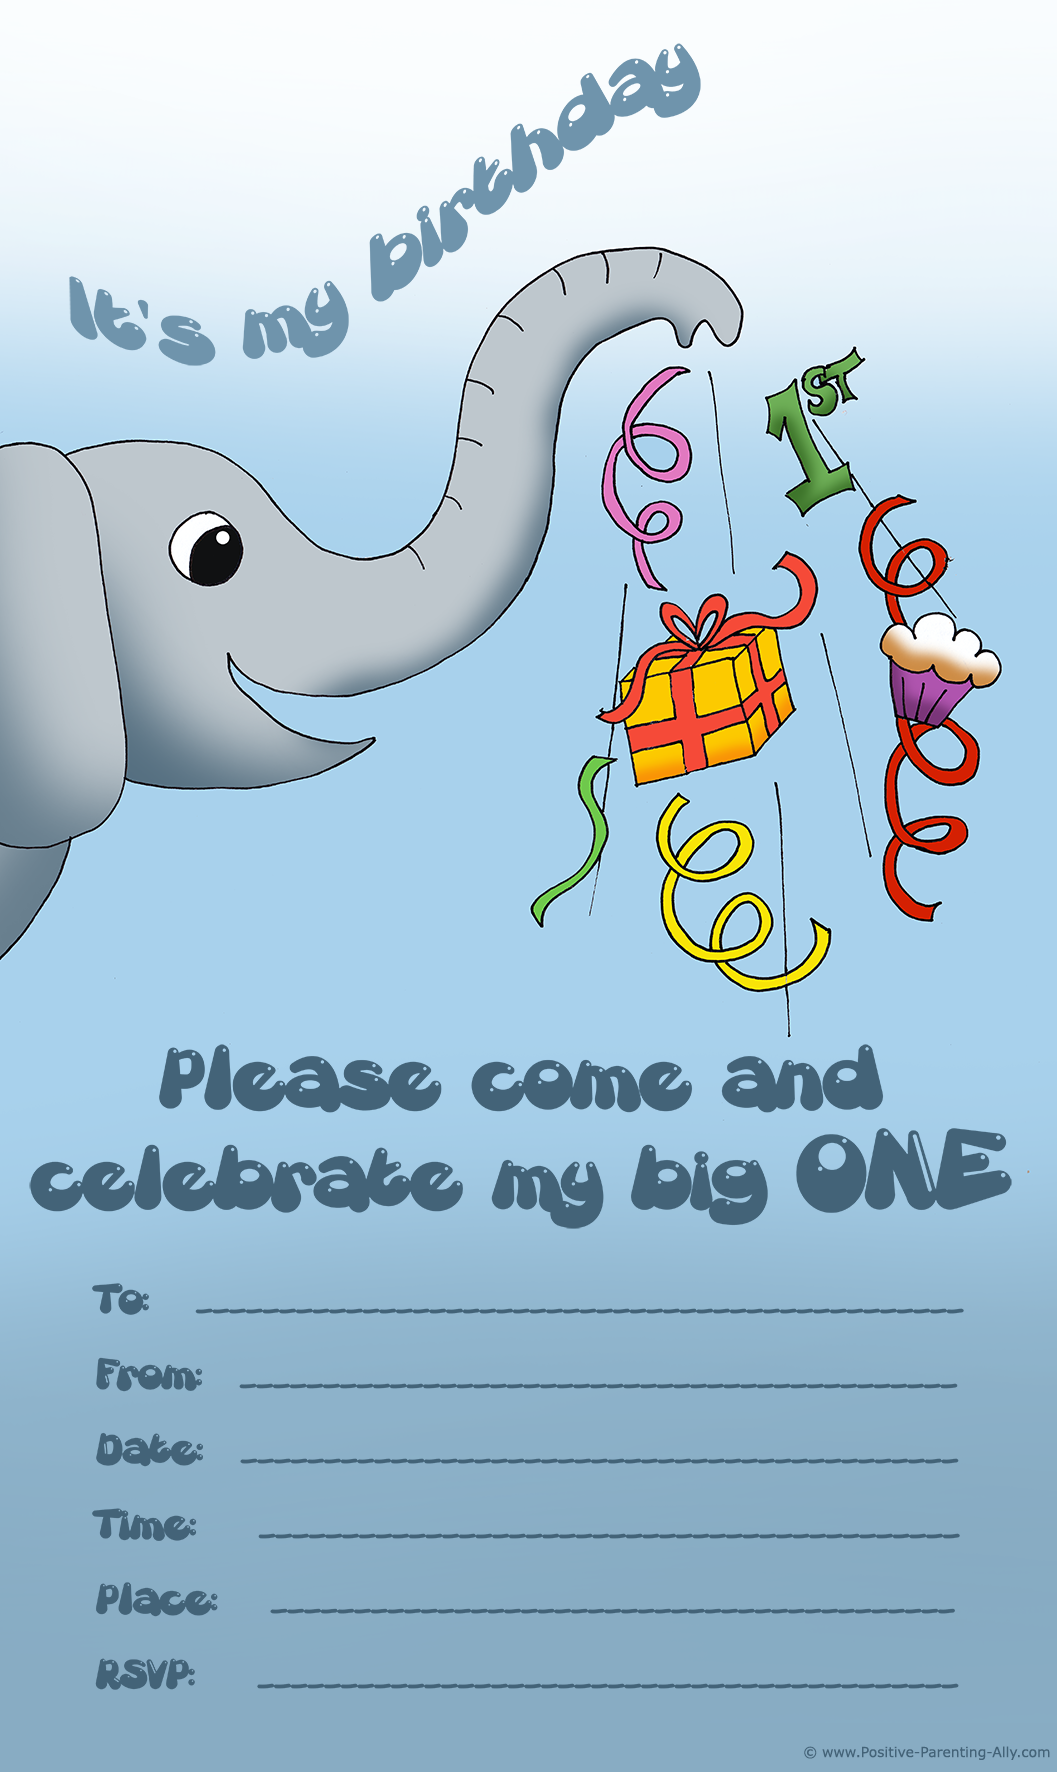 Cute elephant invitation for the very first birthday. Free and printable.